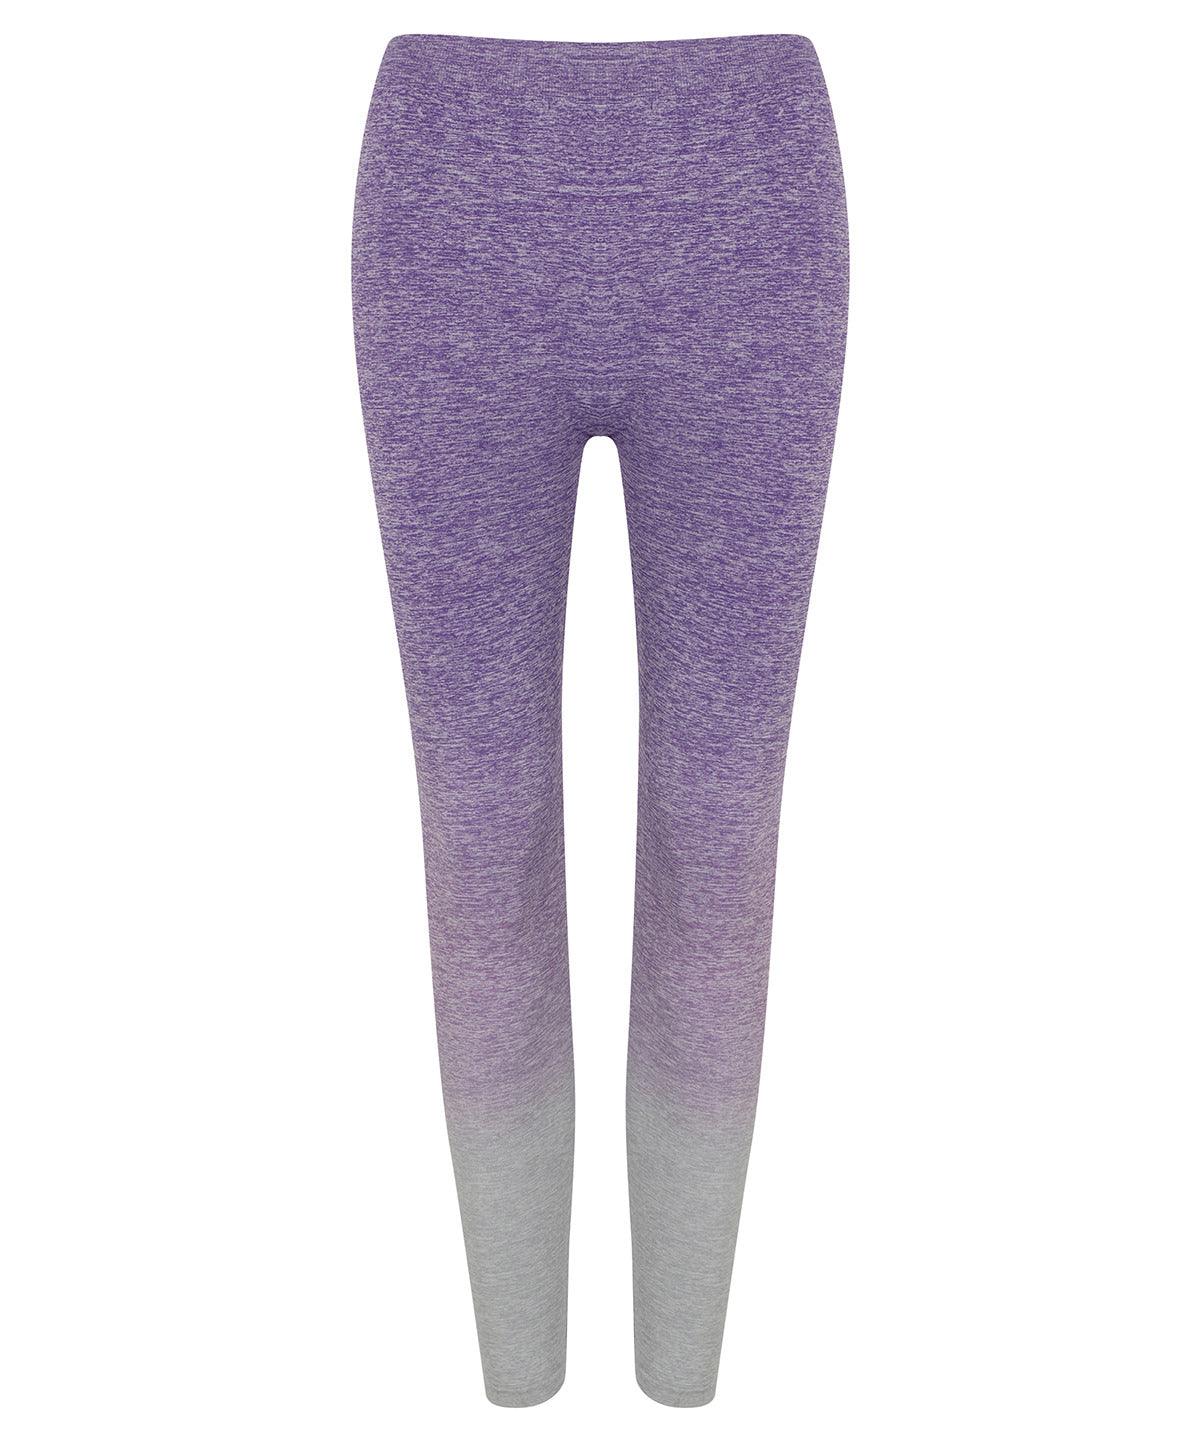 Purple/Light Grey Marl - Women's seamless fade out leggings Leggings Tombo Activewear & Performance, Athleisurewear, Fashion Leggings, Leggings, Must Haves, On-Trend Activewear, Sports & Leisure, Trousers & Shorts, Women's Fashion Schoolwear Centres